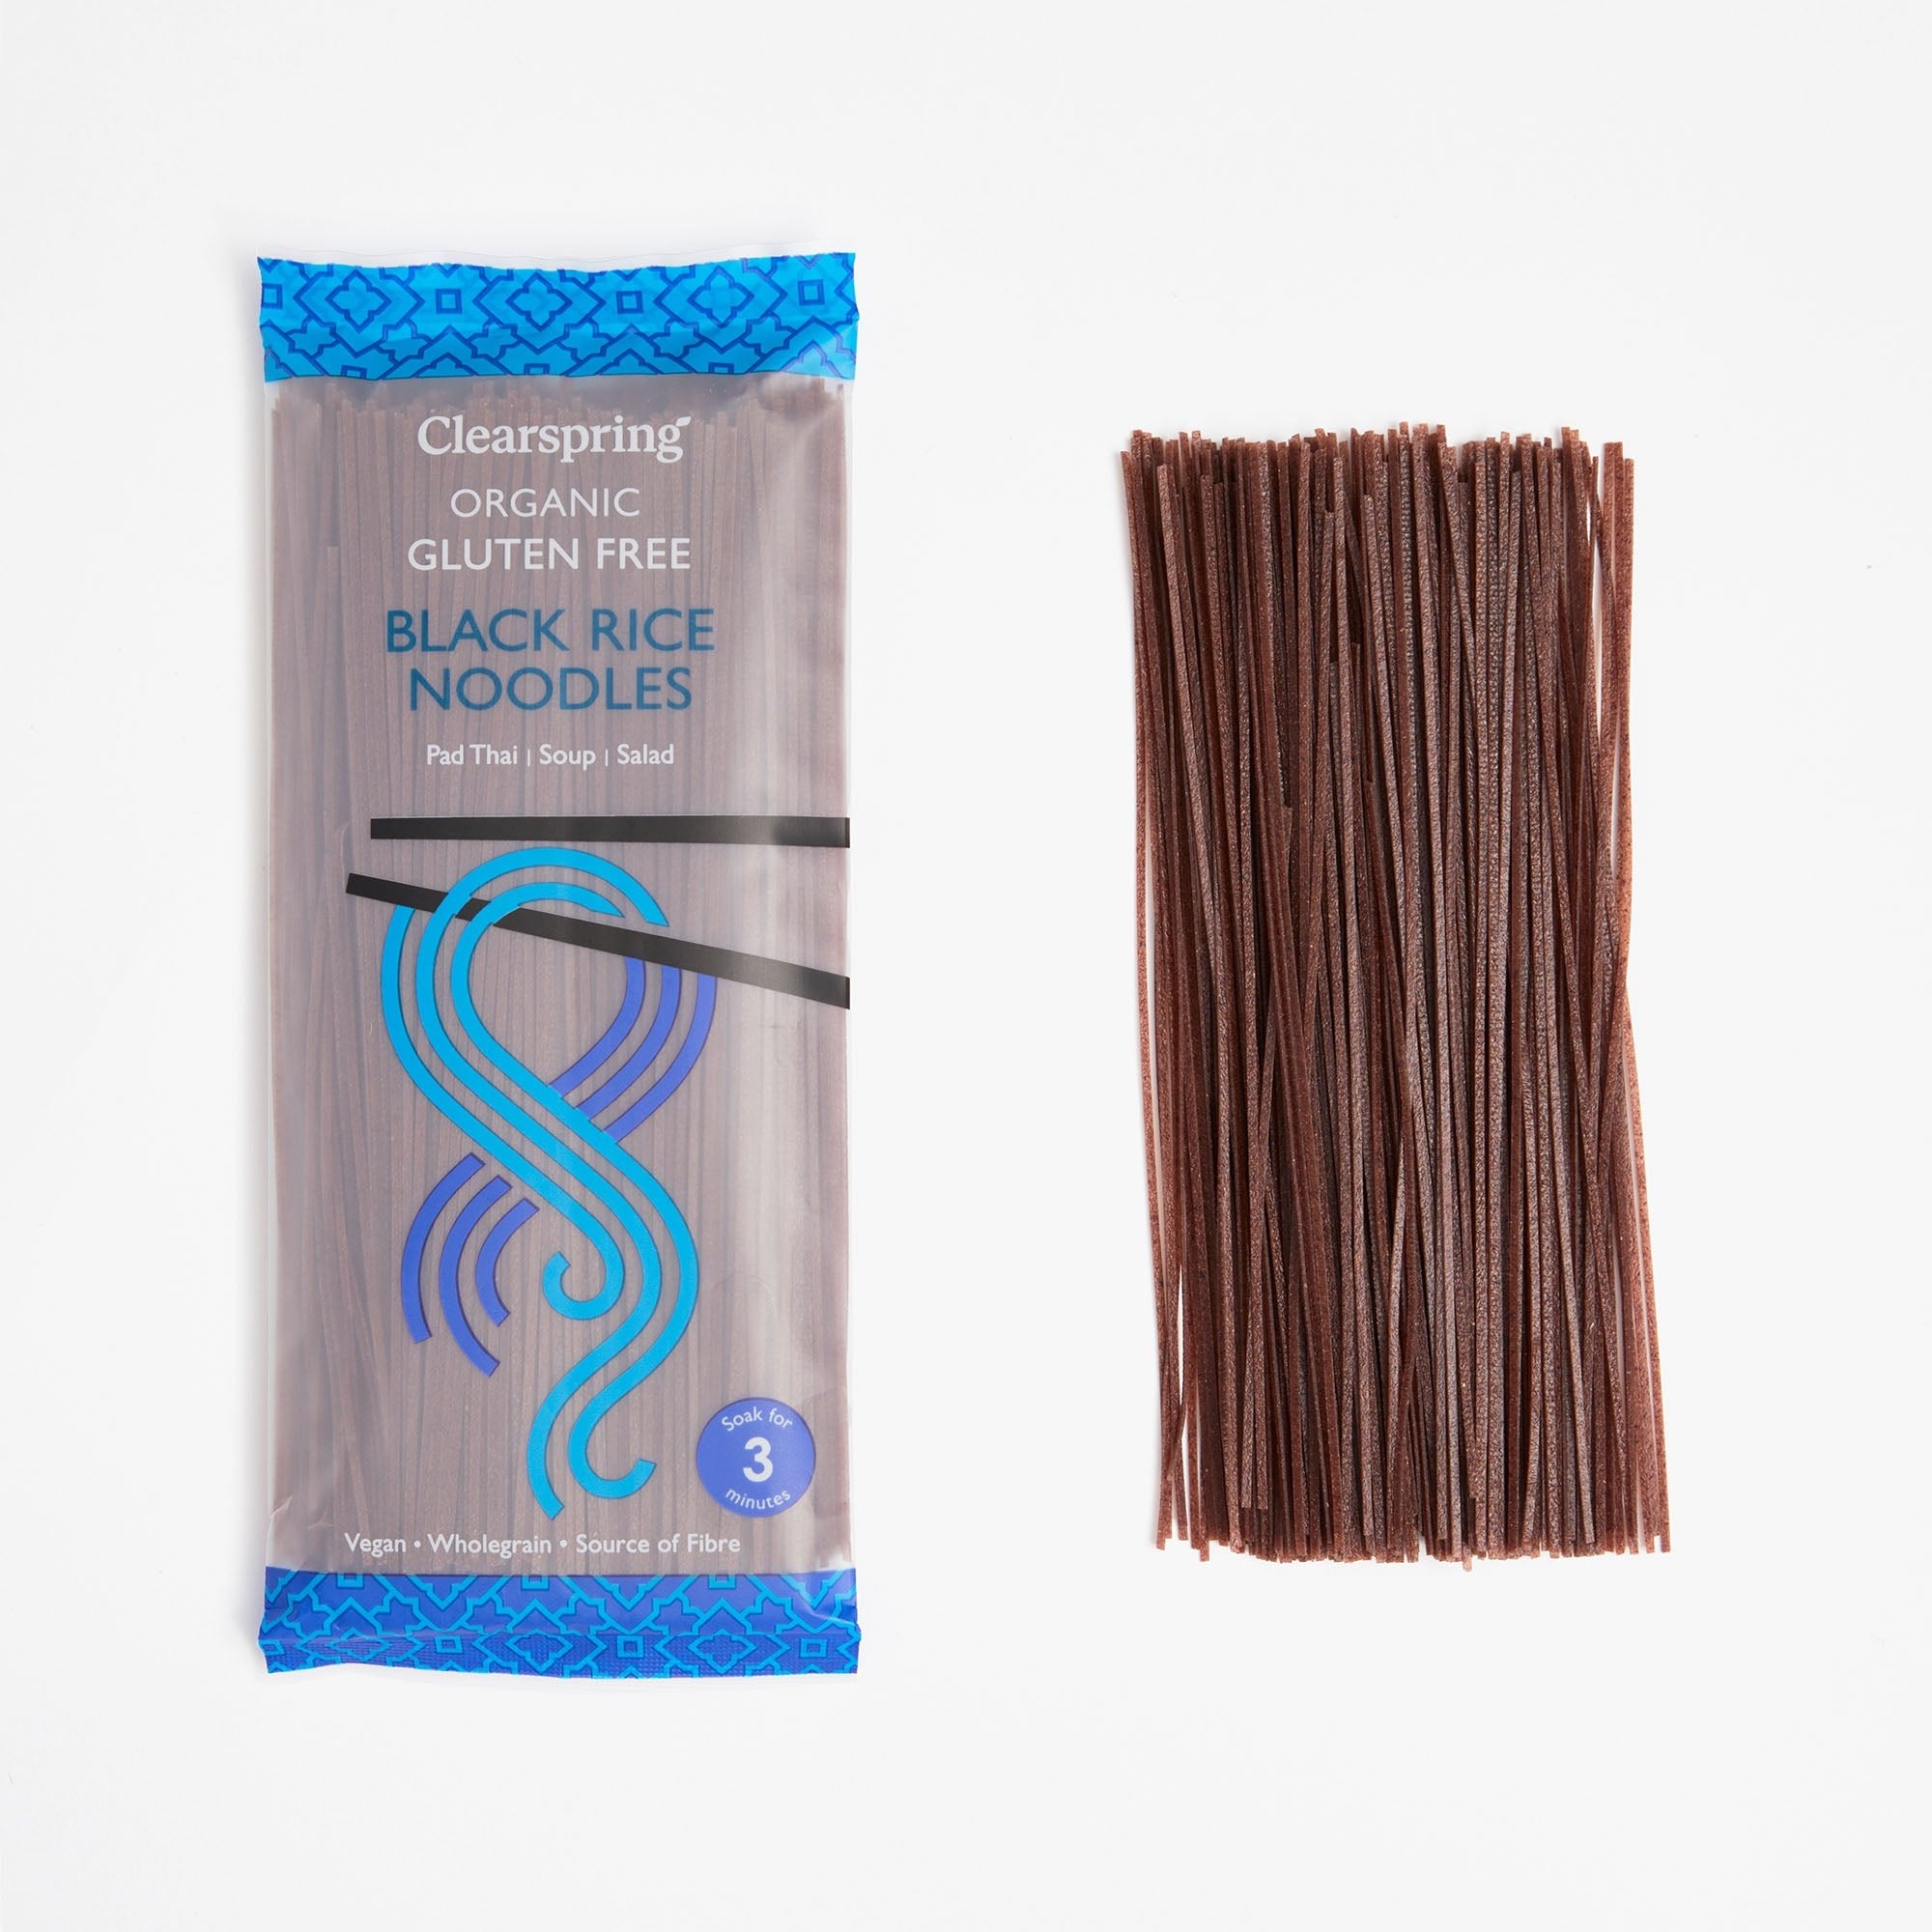 Clearspring Organic Gluten Free Black Rice Noodles